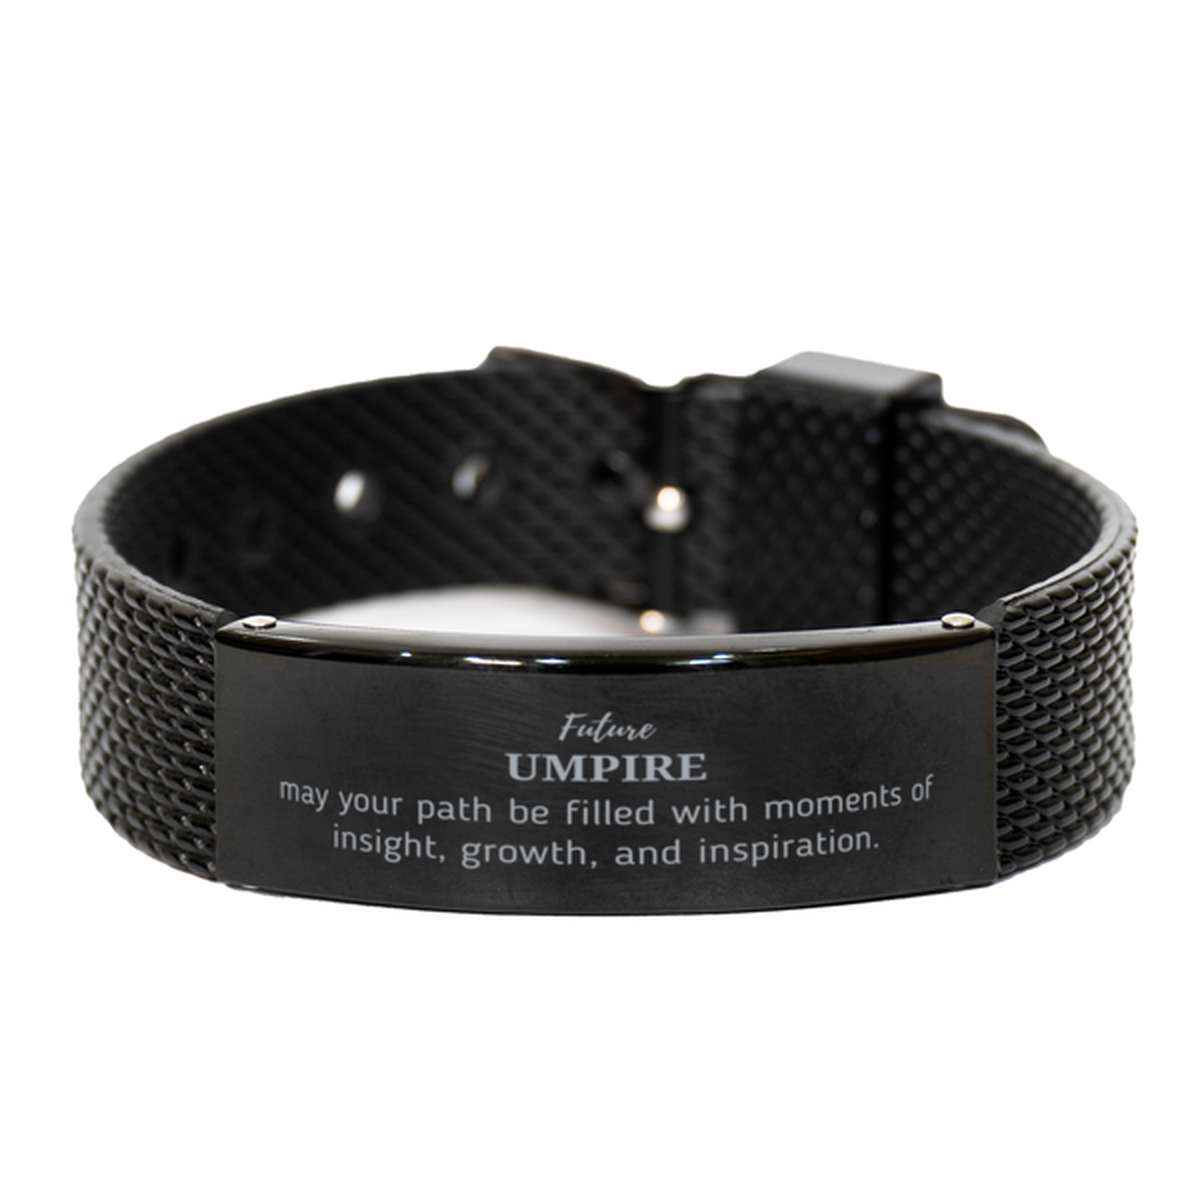 Future Umpire Gifts, May your path be filled with moments of insight, Graduation Gifts for New Umpire, Christmas Unique Black Shark Mesh Bracelet For Men, Women, Friends